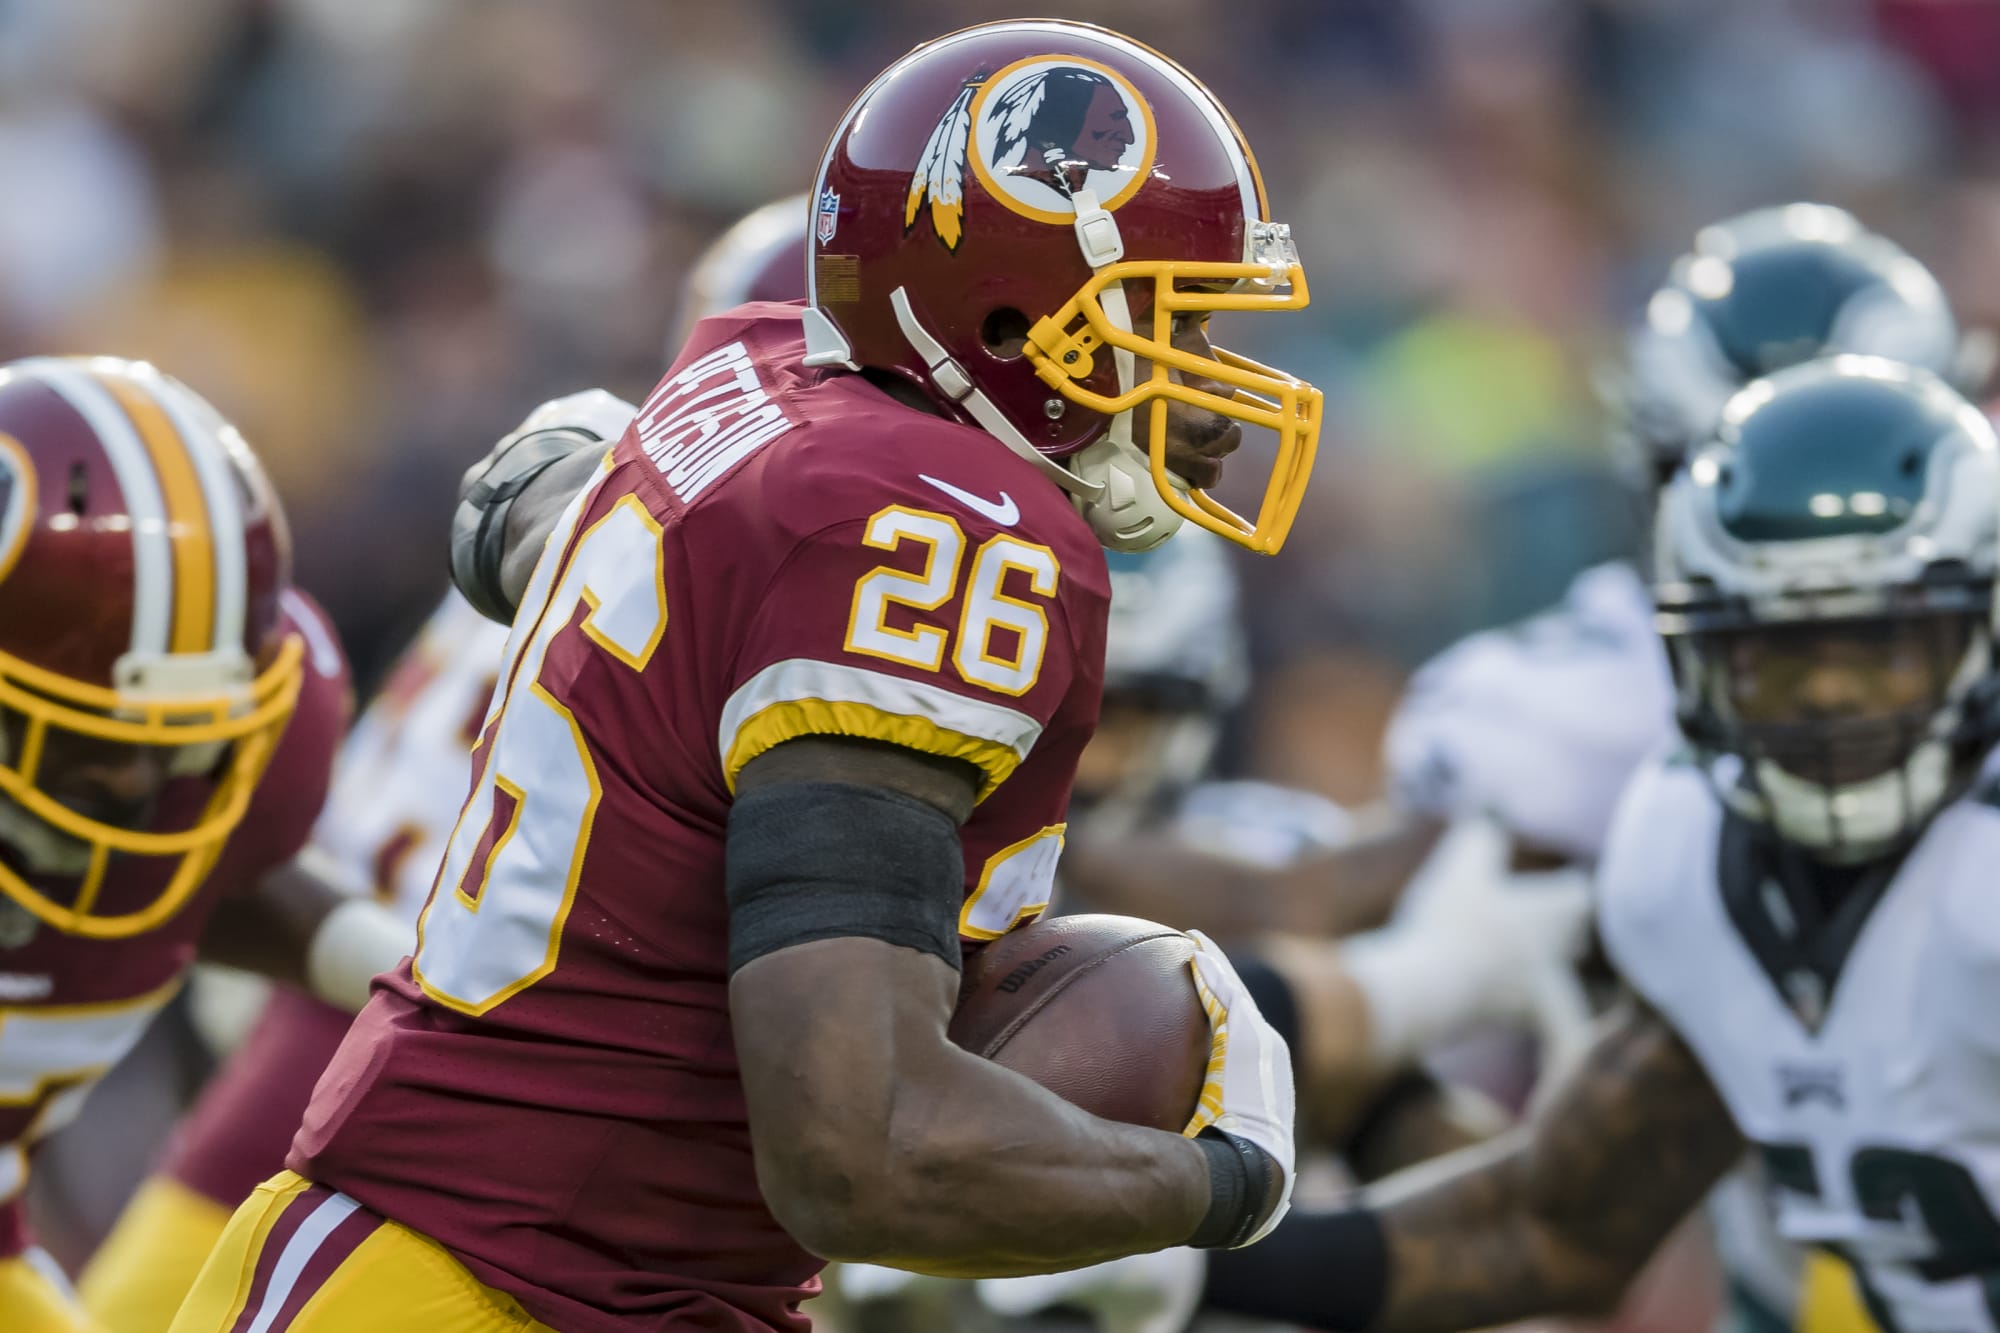 Washington Redskins 2019 schedule release Games, dates and times